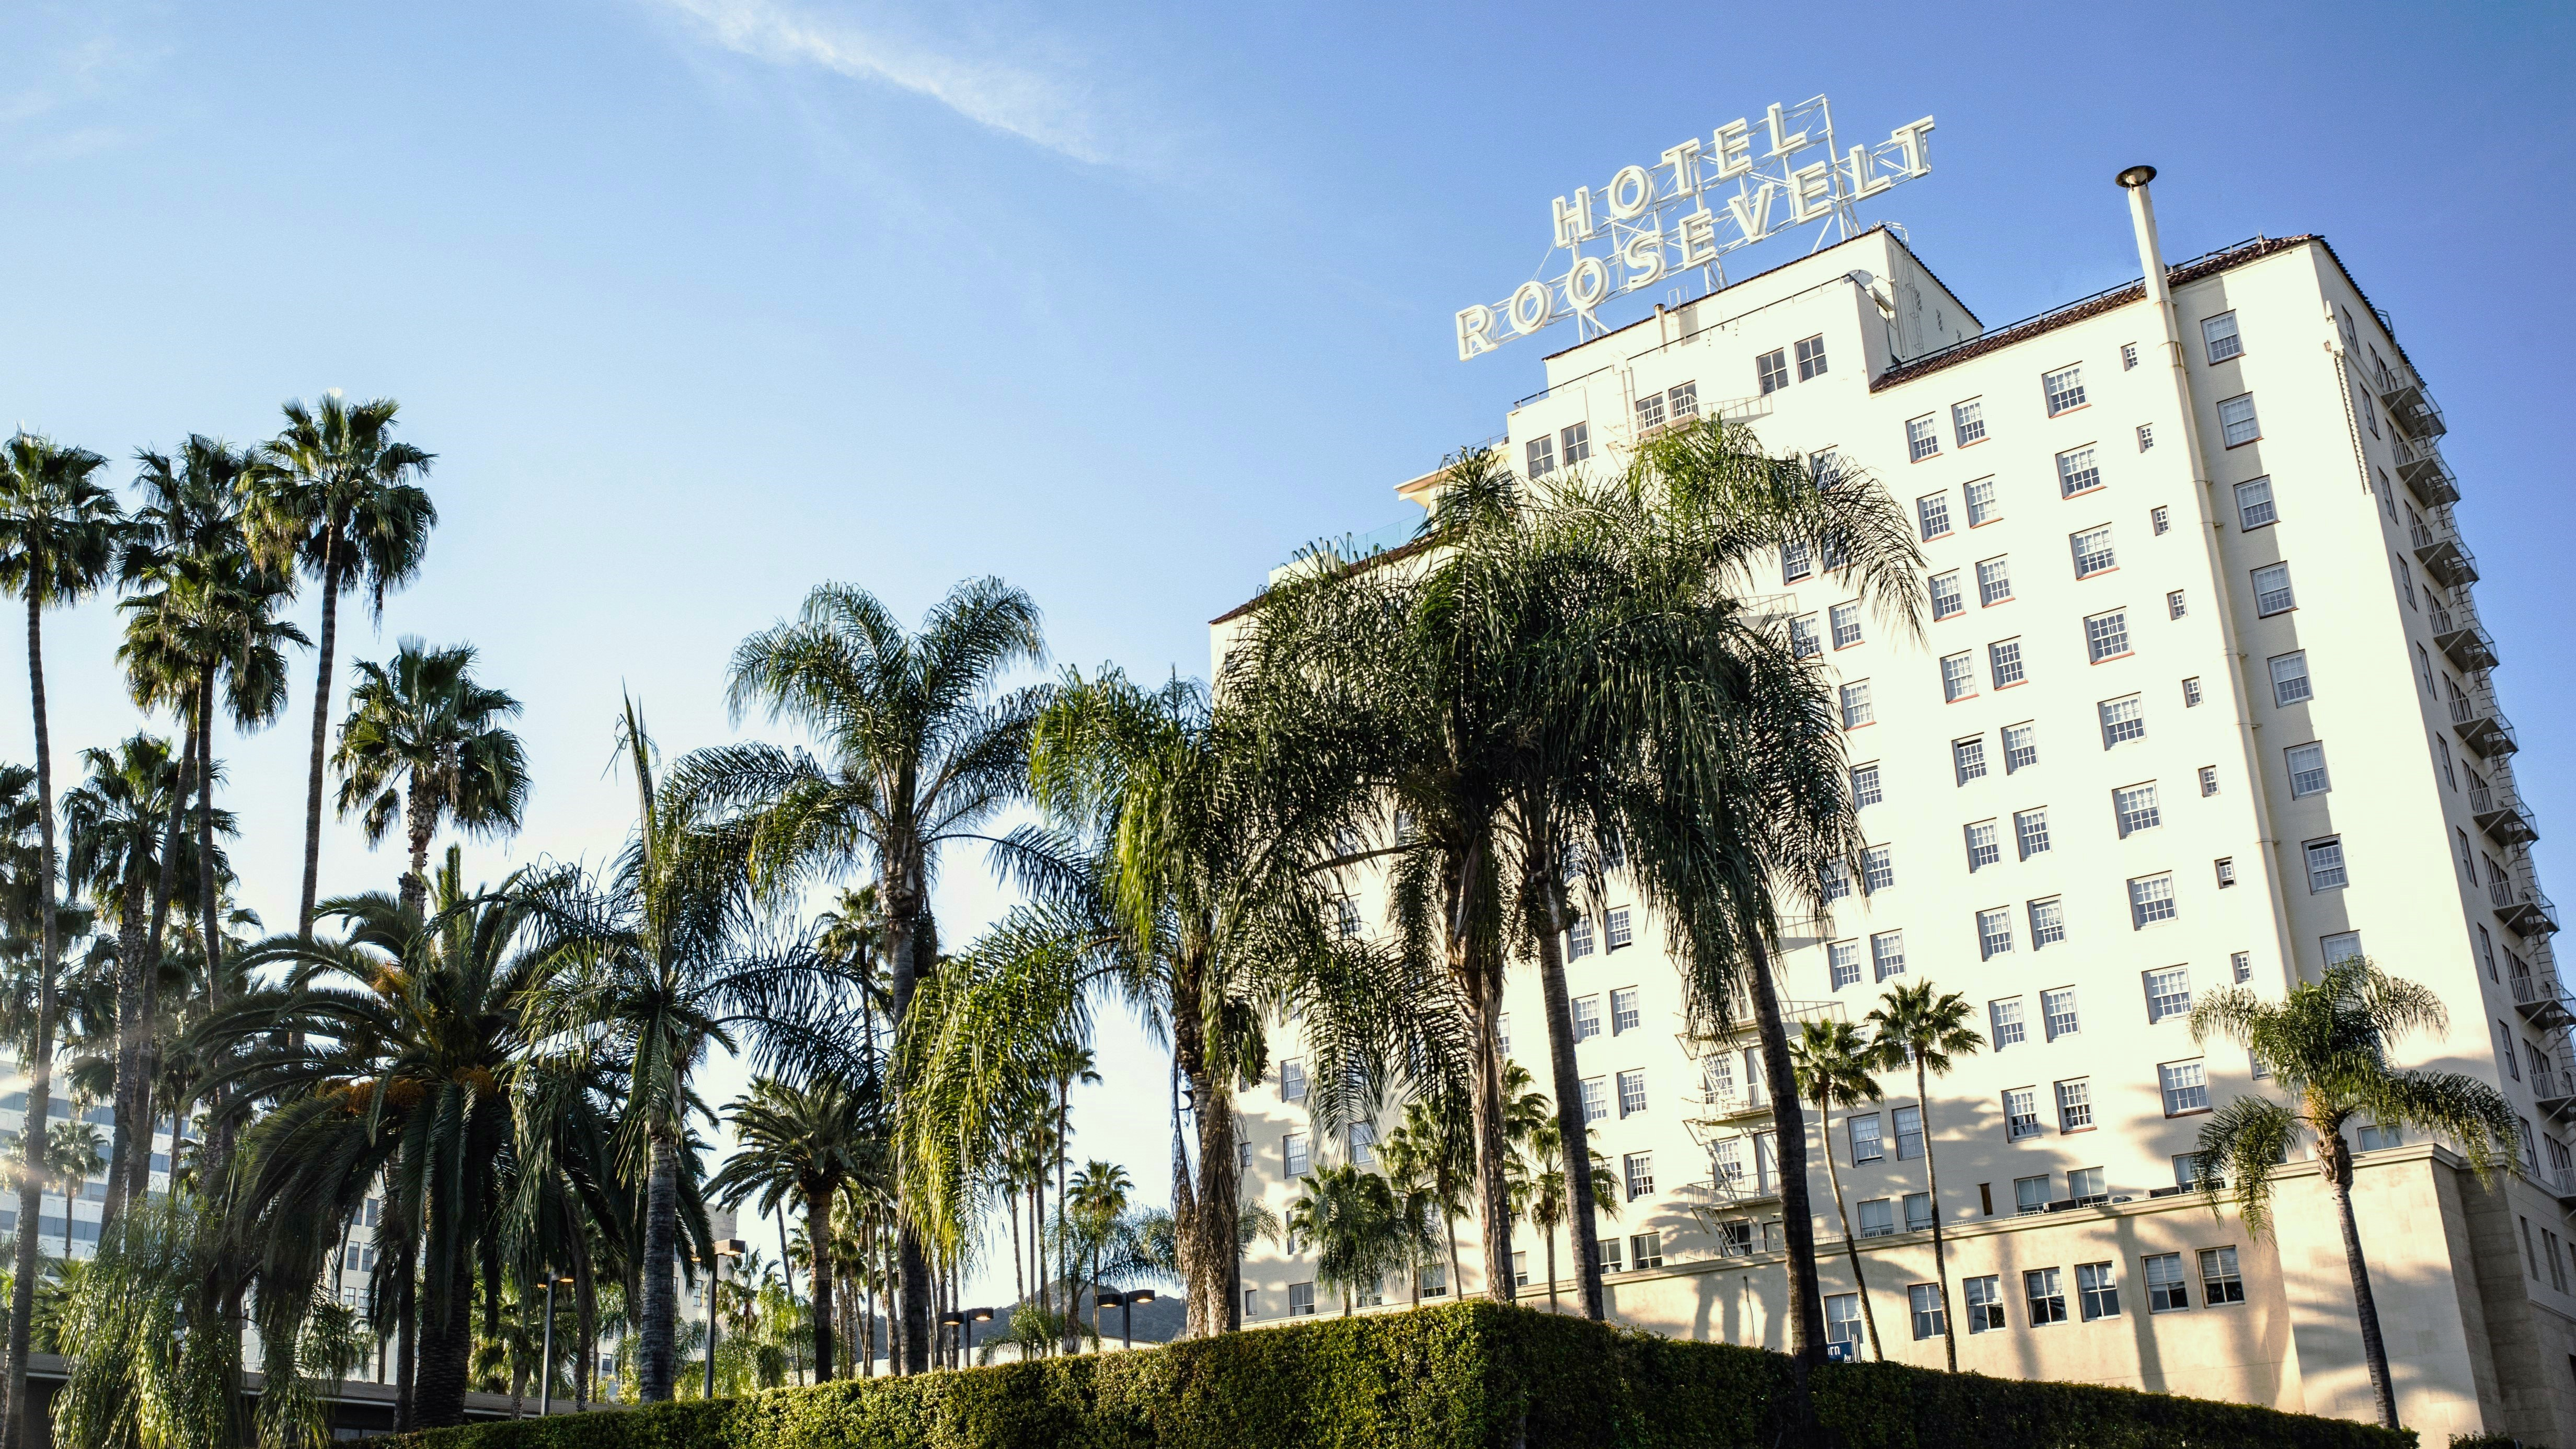 https://mms.businesswire.com/media/20230308005041/en/1731138/5/The_Hollywood_Roosevelt_%281927%29_Hollywood%2C_California_Credit_Historic_Hotels_of_America_and_The_Hollywood_Roosevelt.jpg